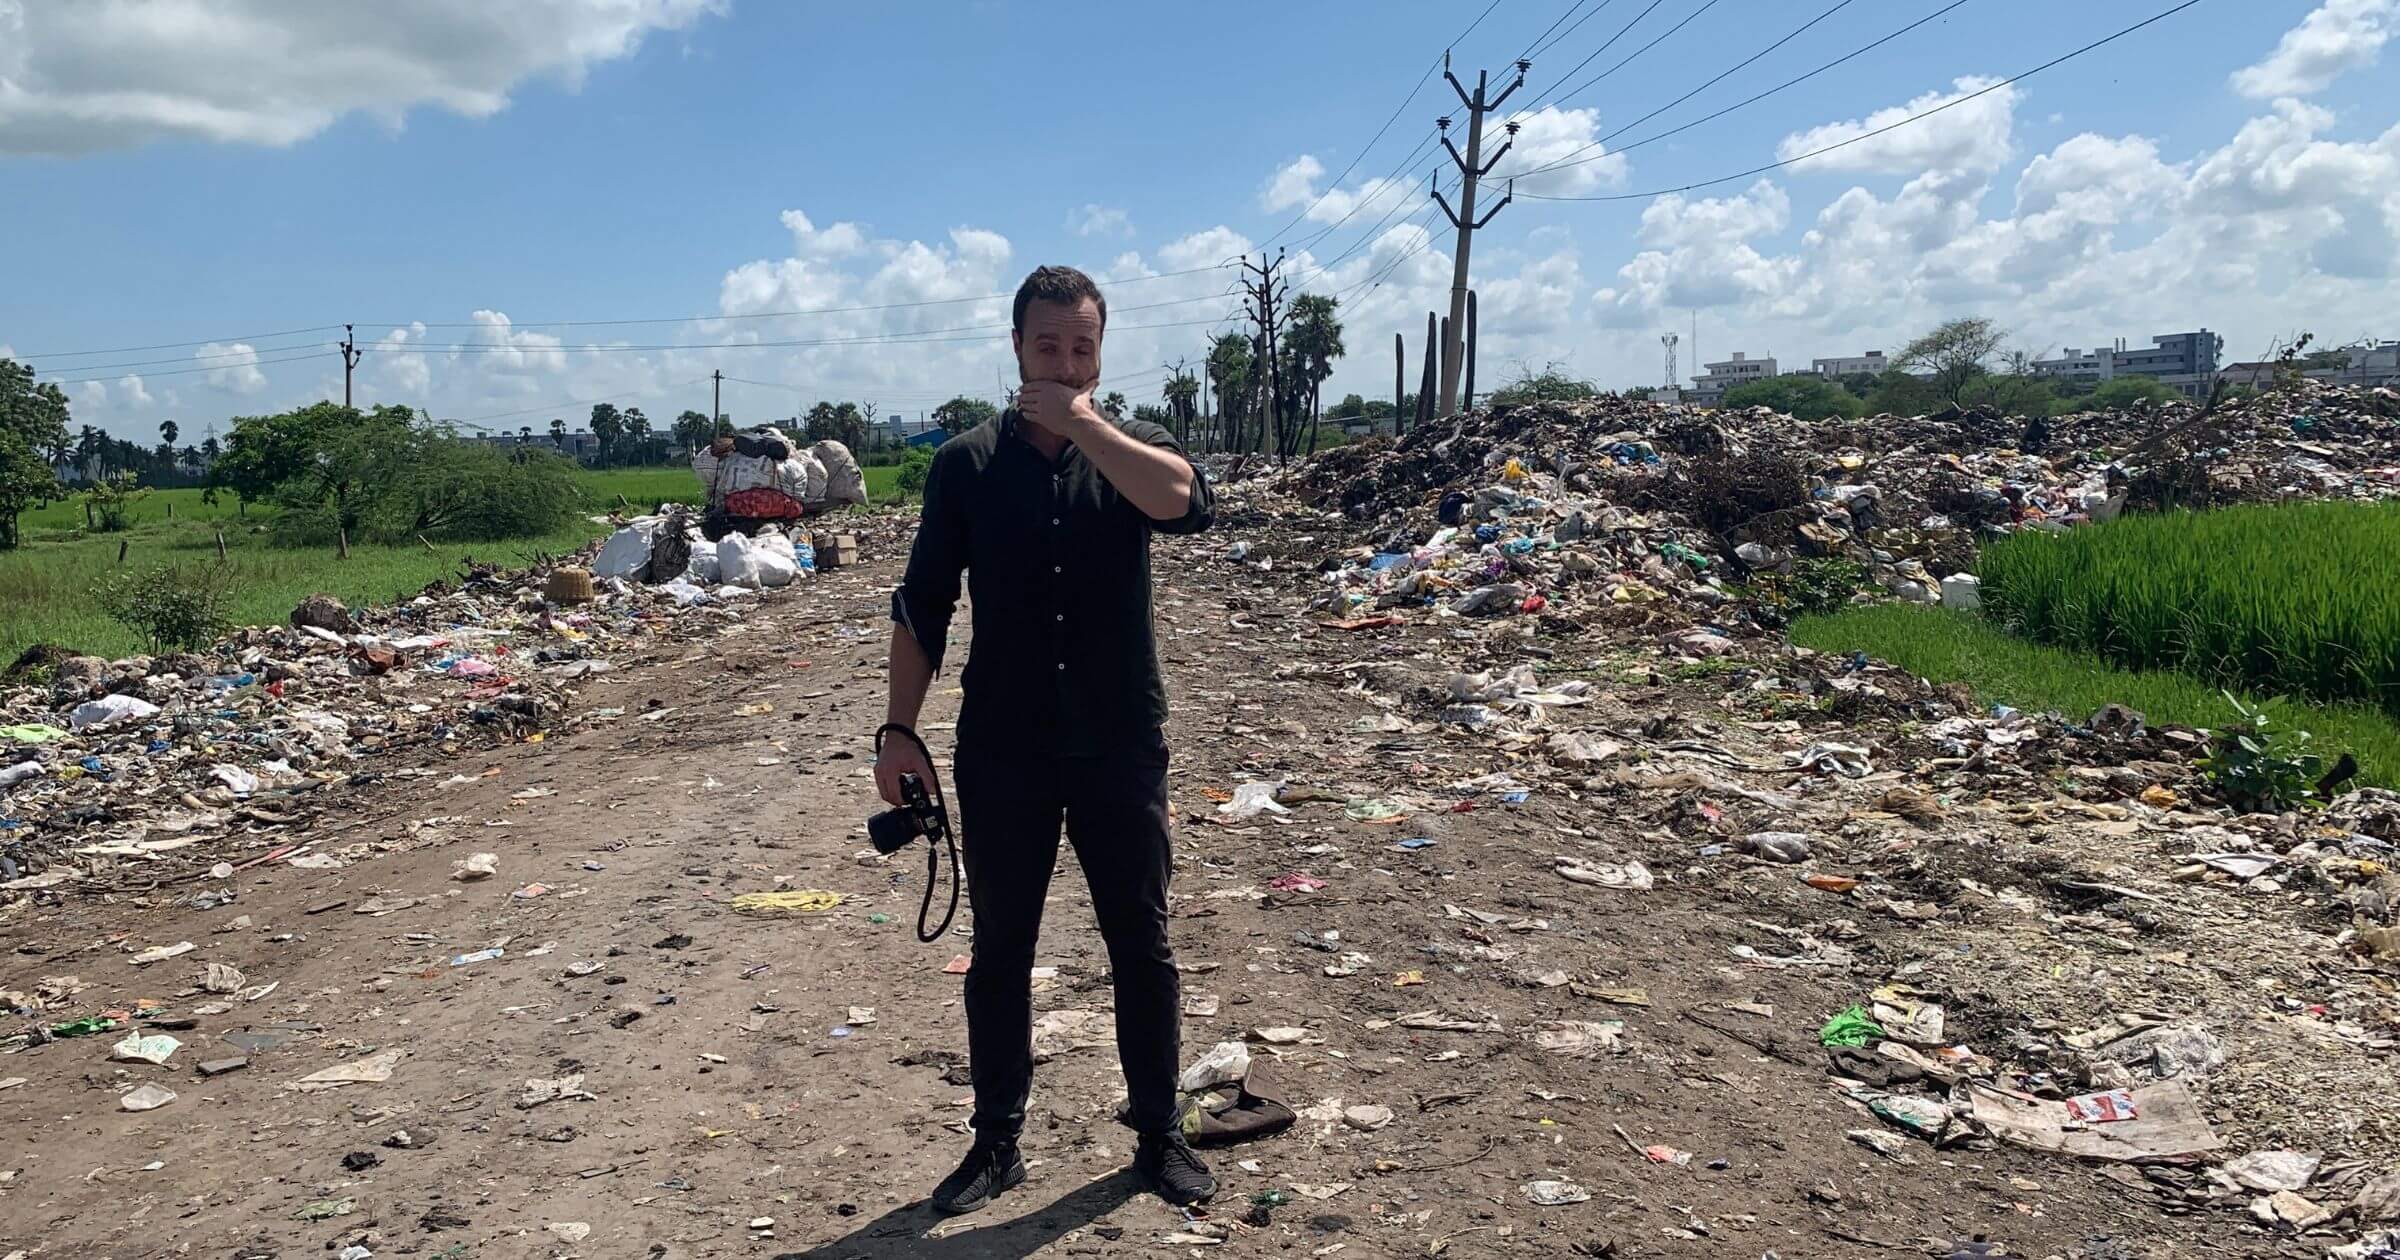 Joel Tasche, co-founder of CleanHub, stands in the middle of a muddy road with trash littered everywhere